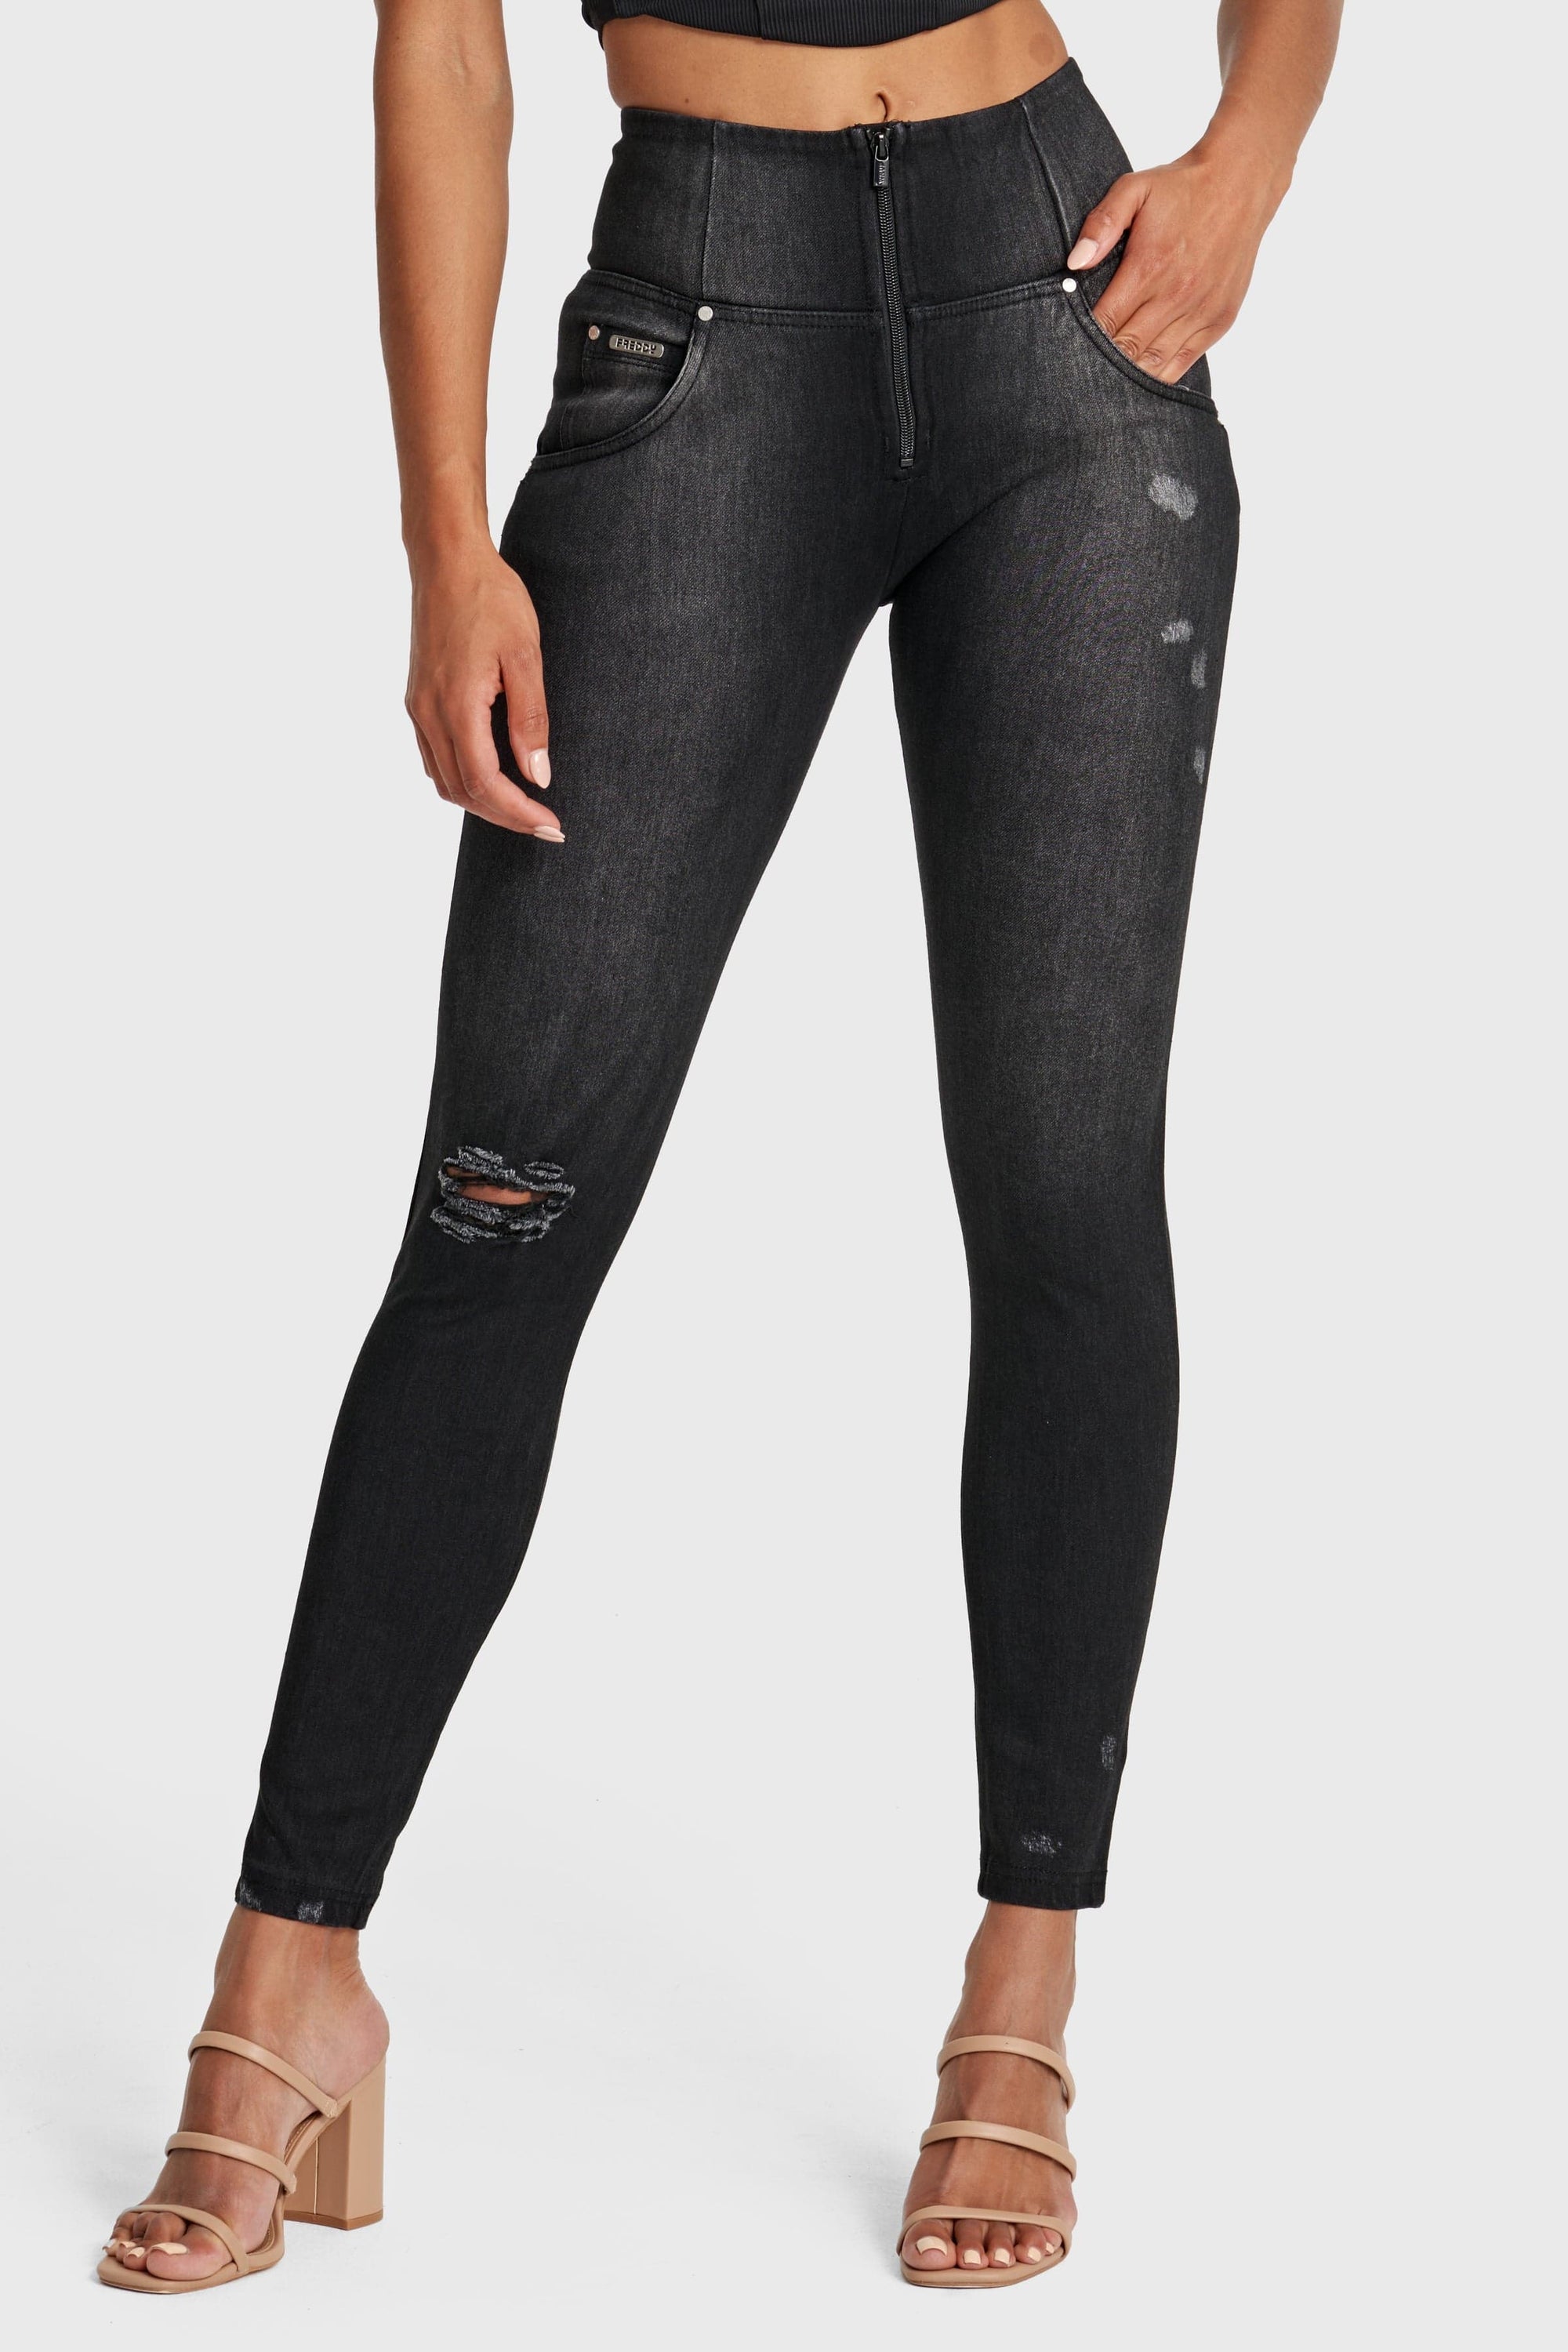 WR.UP® Snug Distressed Jeans - High Waisted - Full Length - Black + Black Stitching 1